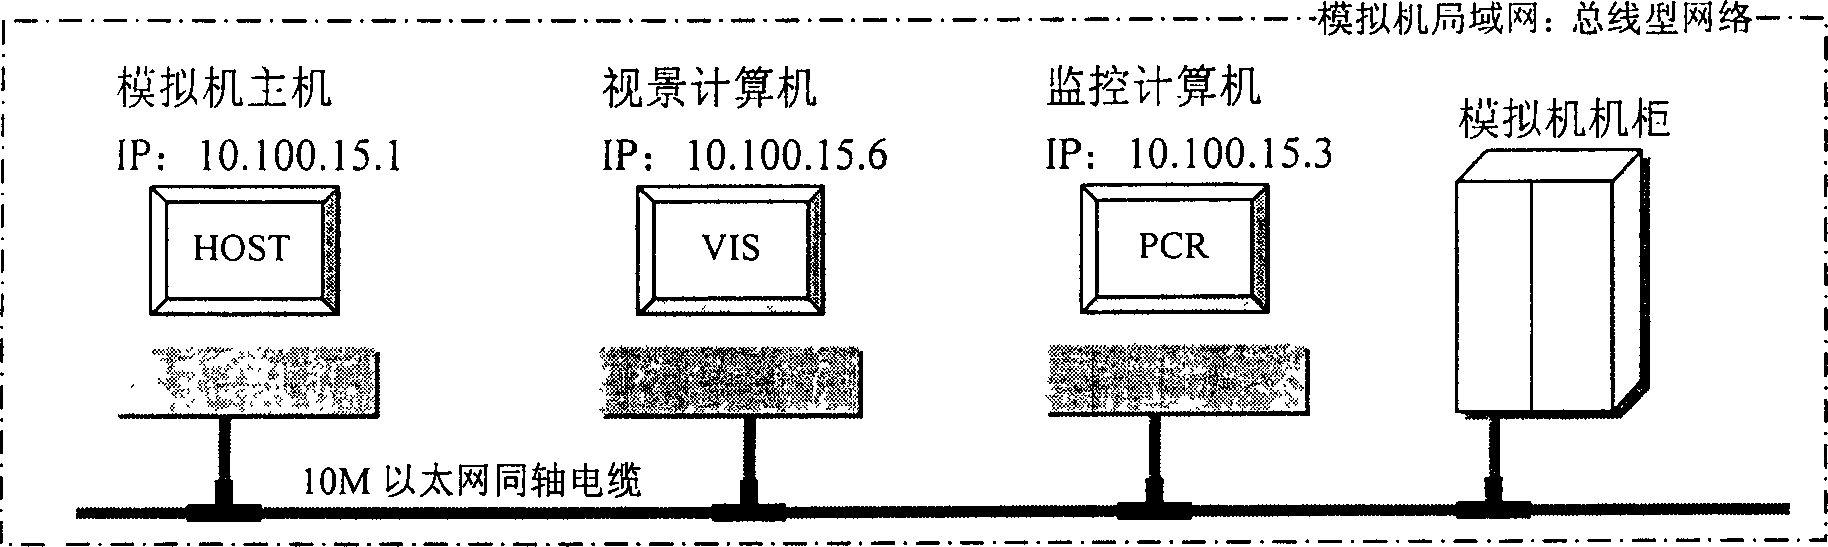 Computer-aided teaching system and method for stimulated aviation training